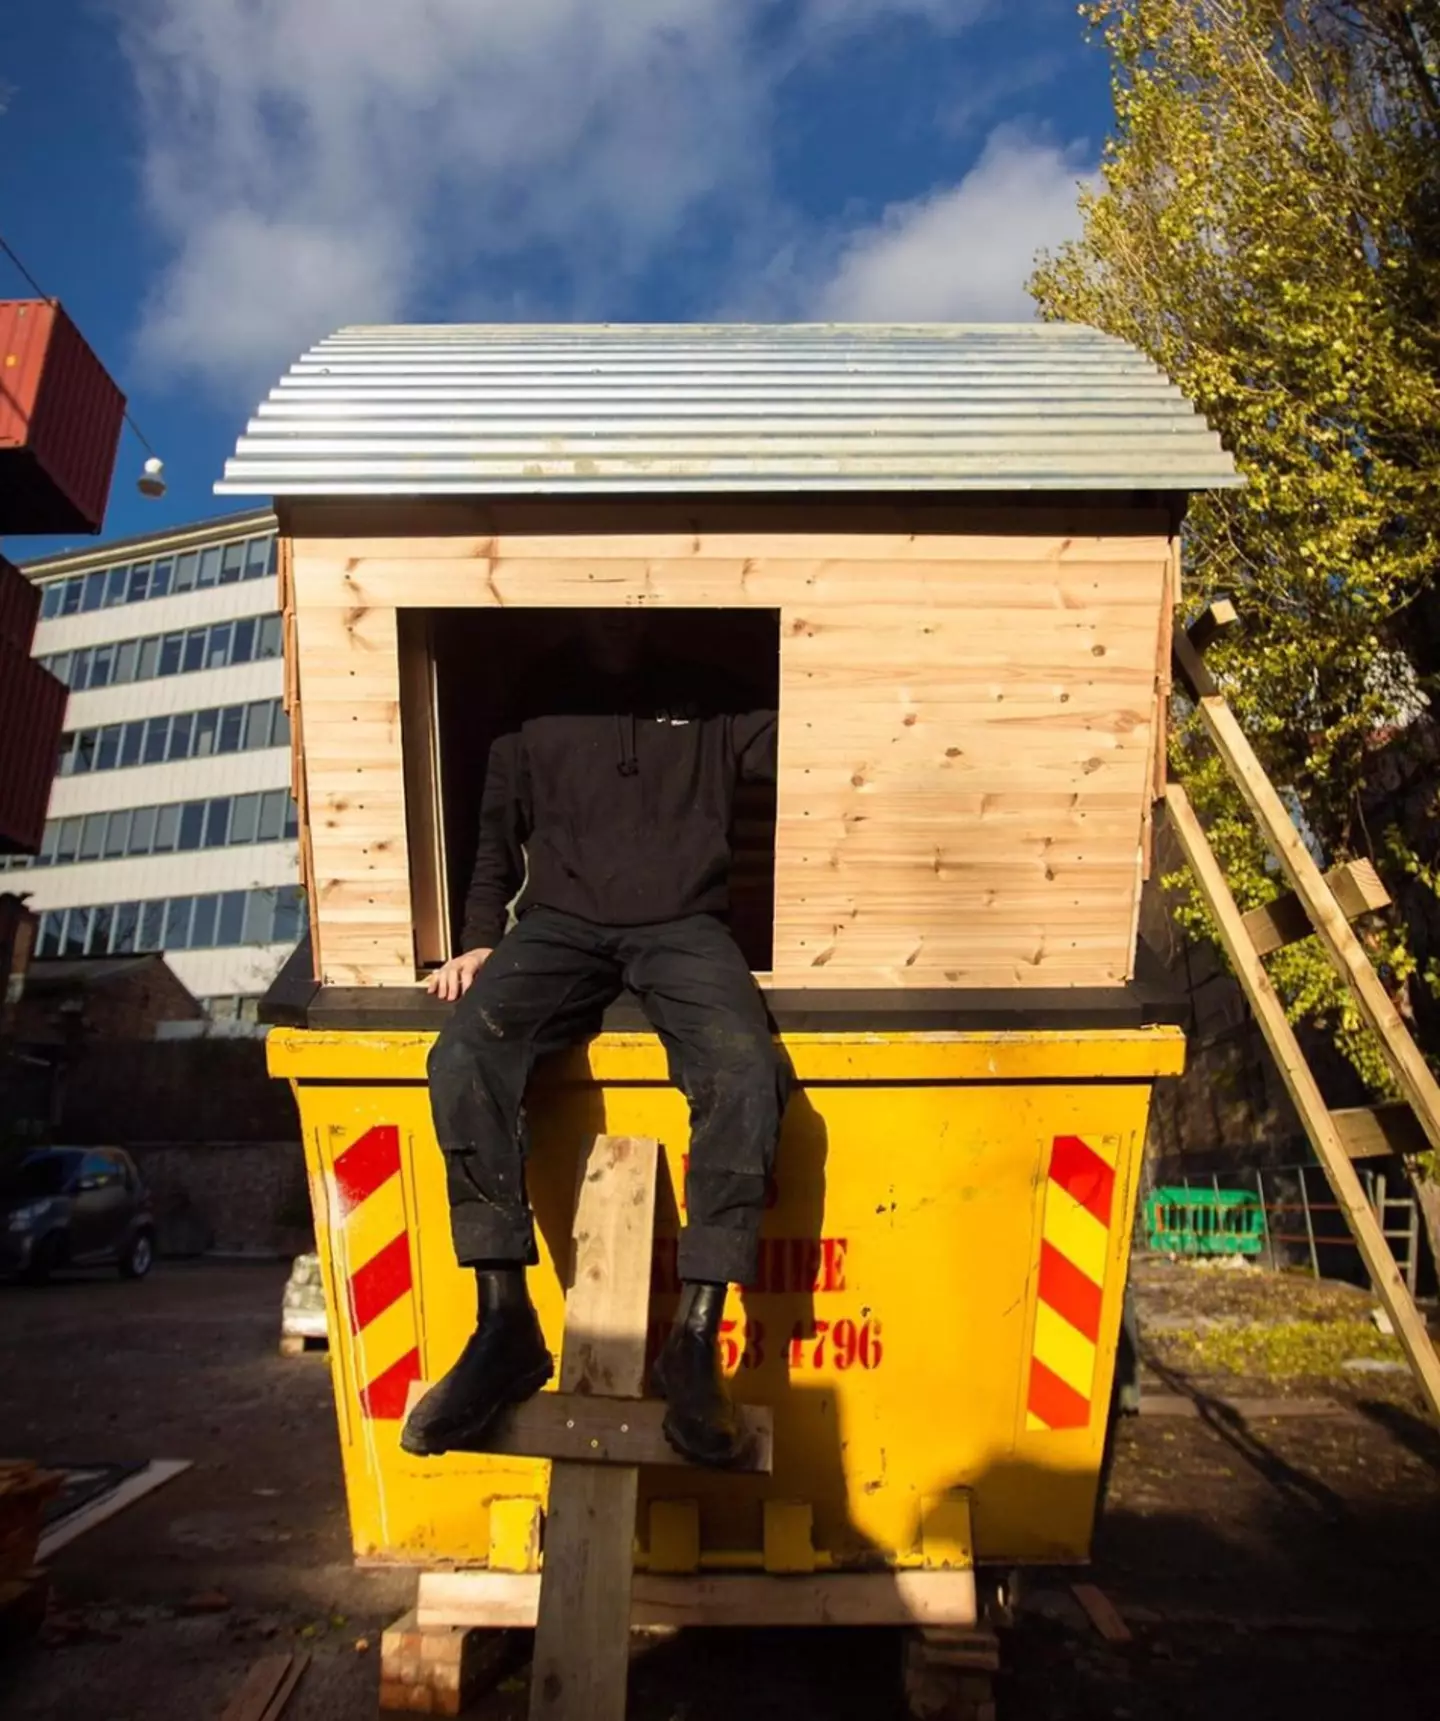 The 'actual build' of Harrison's dumpster home took 'about three or four weeks'.